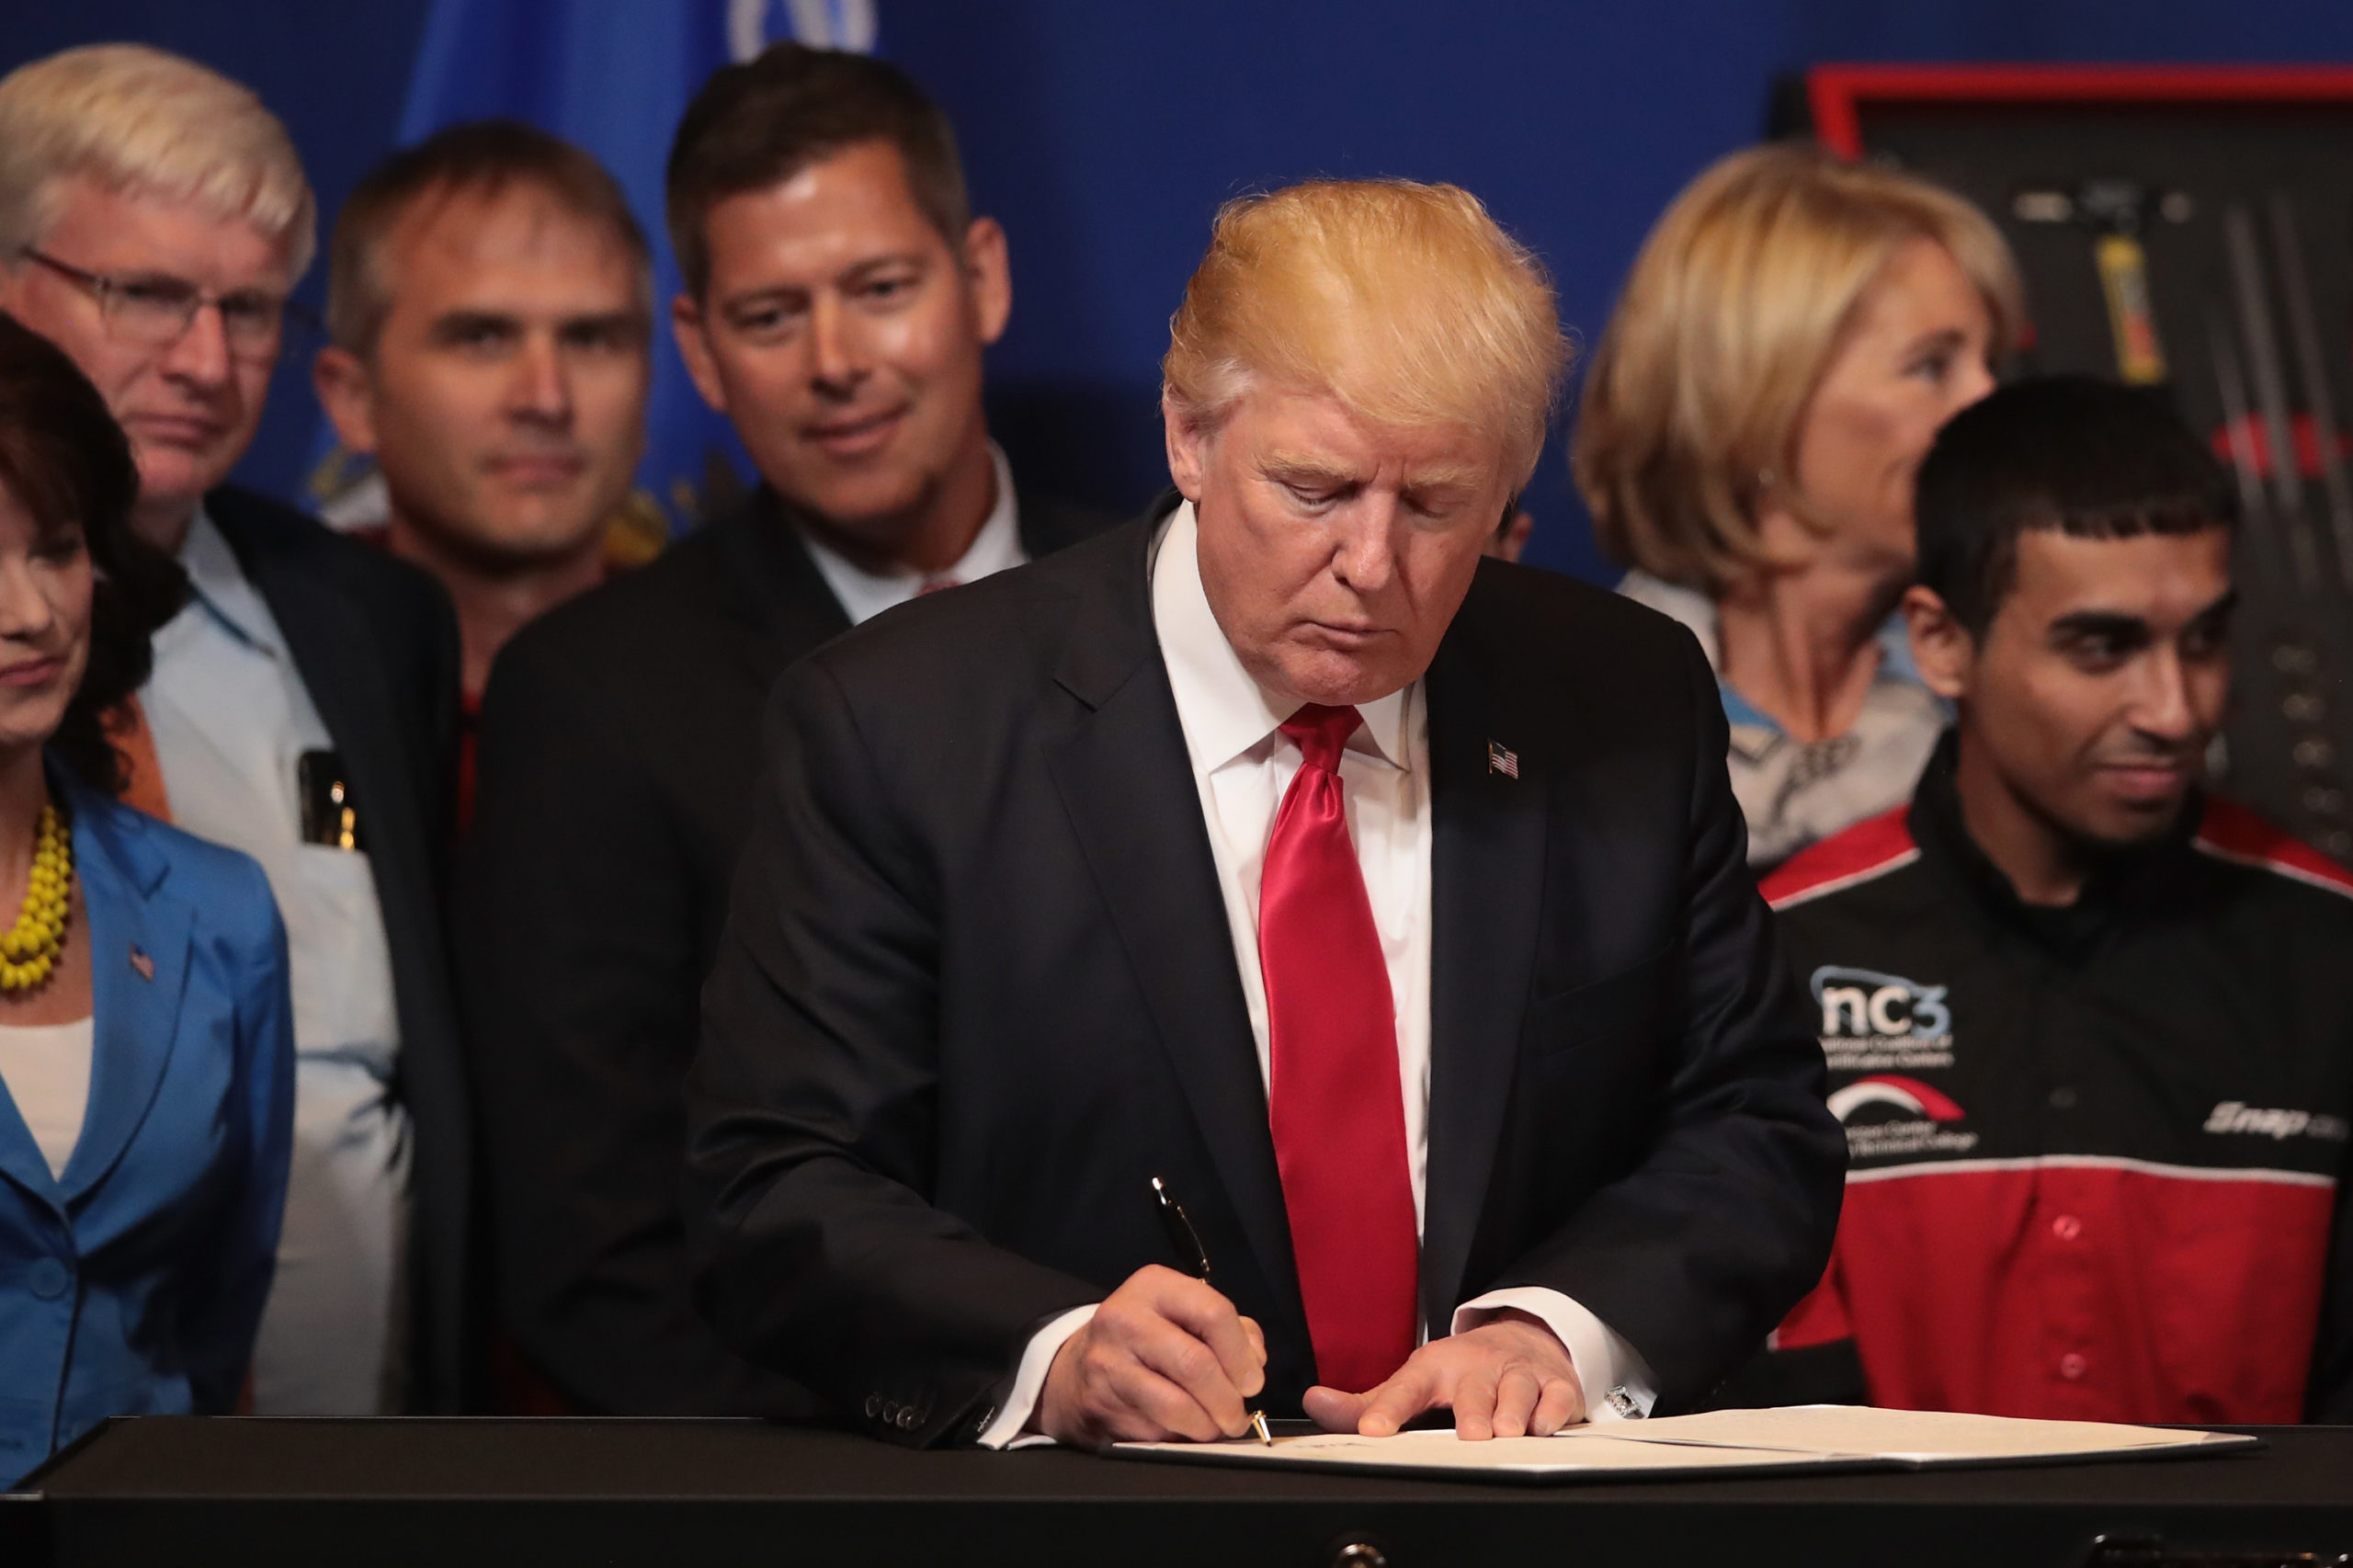 KENOSHA, WI - APRIL 18: President Donald Trump signs an executive order to try to bring jobs back to American workers and revamp the H-1B visa guest worker program during a visit to the headquarters of tool manufacturer Snap-On on April 18, 2017 in Kenosha, Wisconsin. (Photo by Scott Olson/Getty Images)